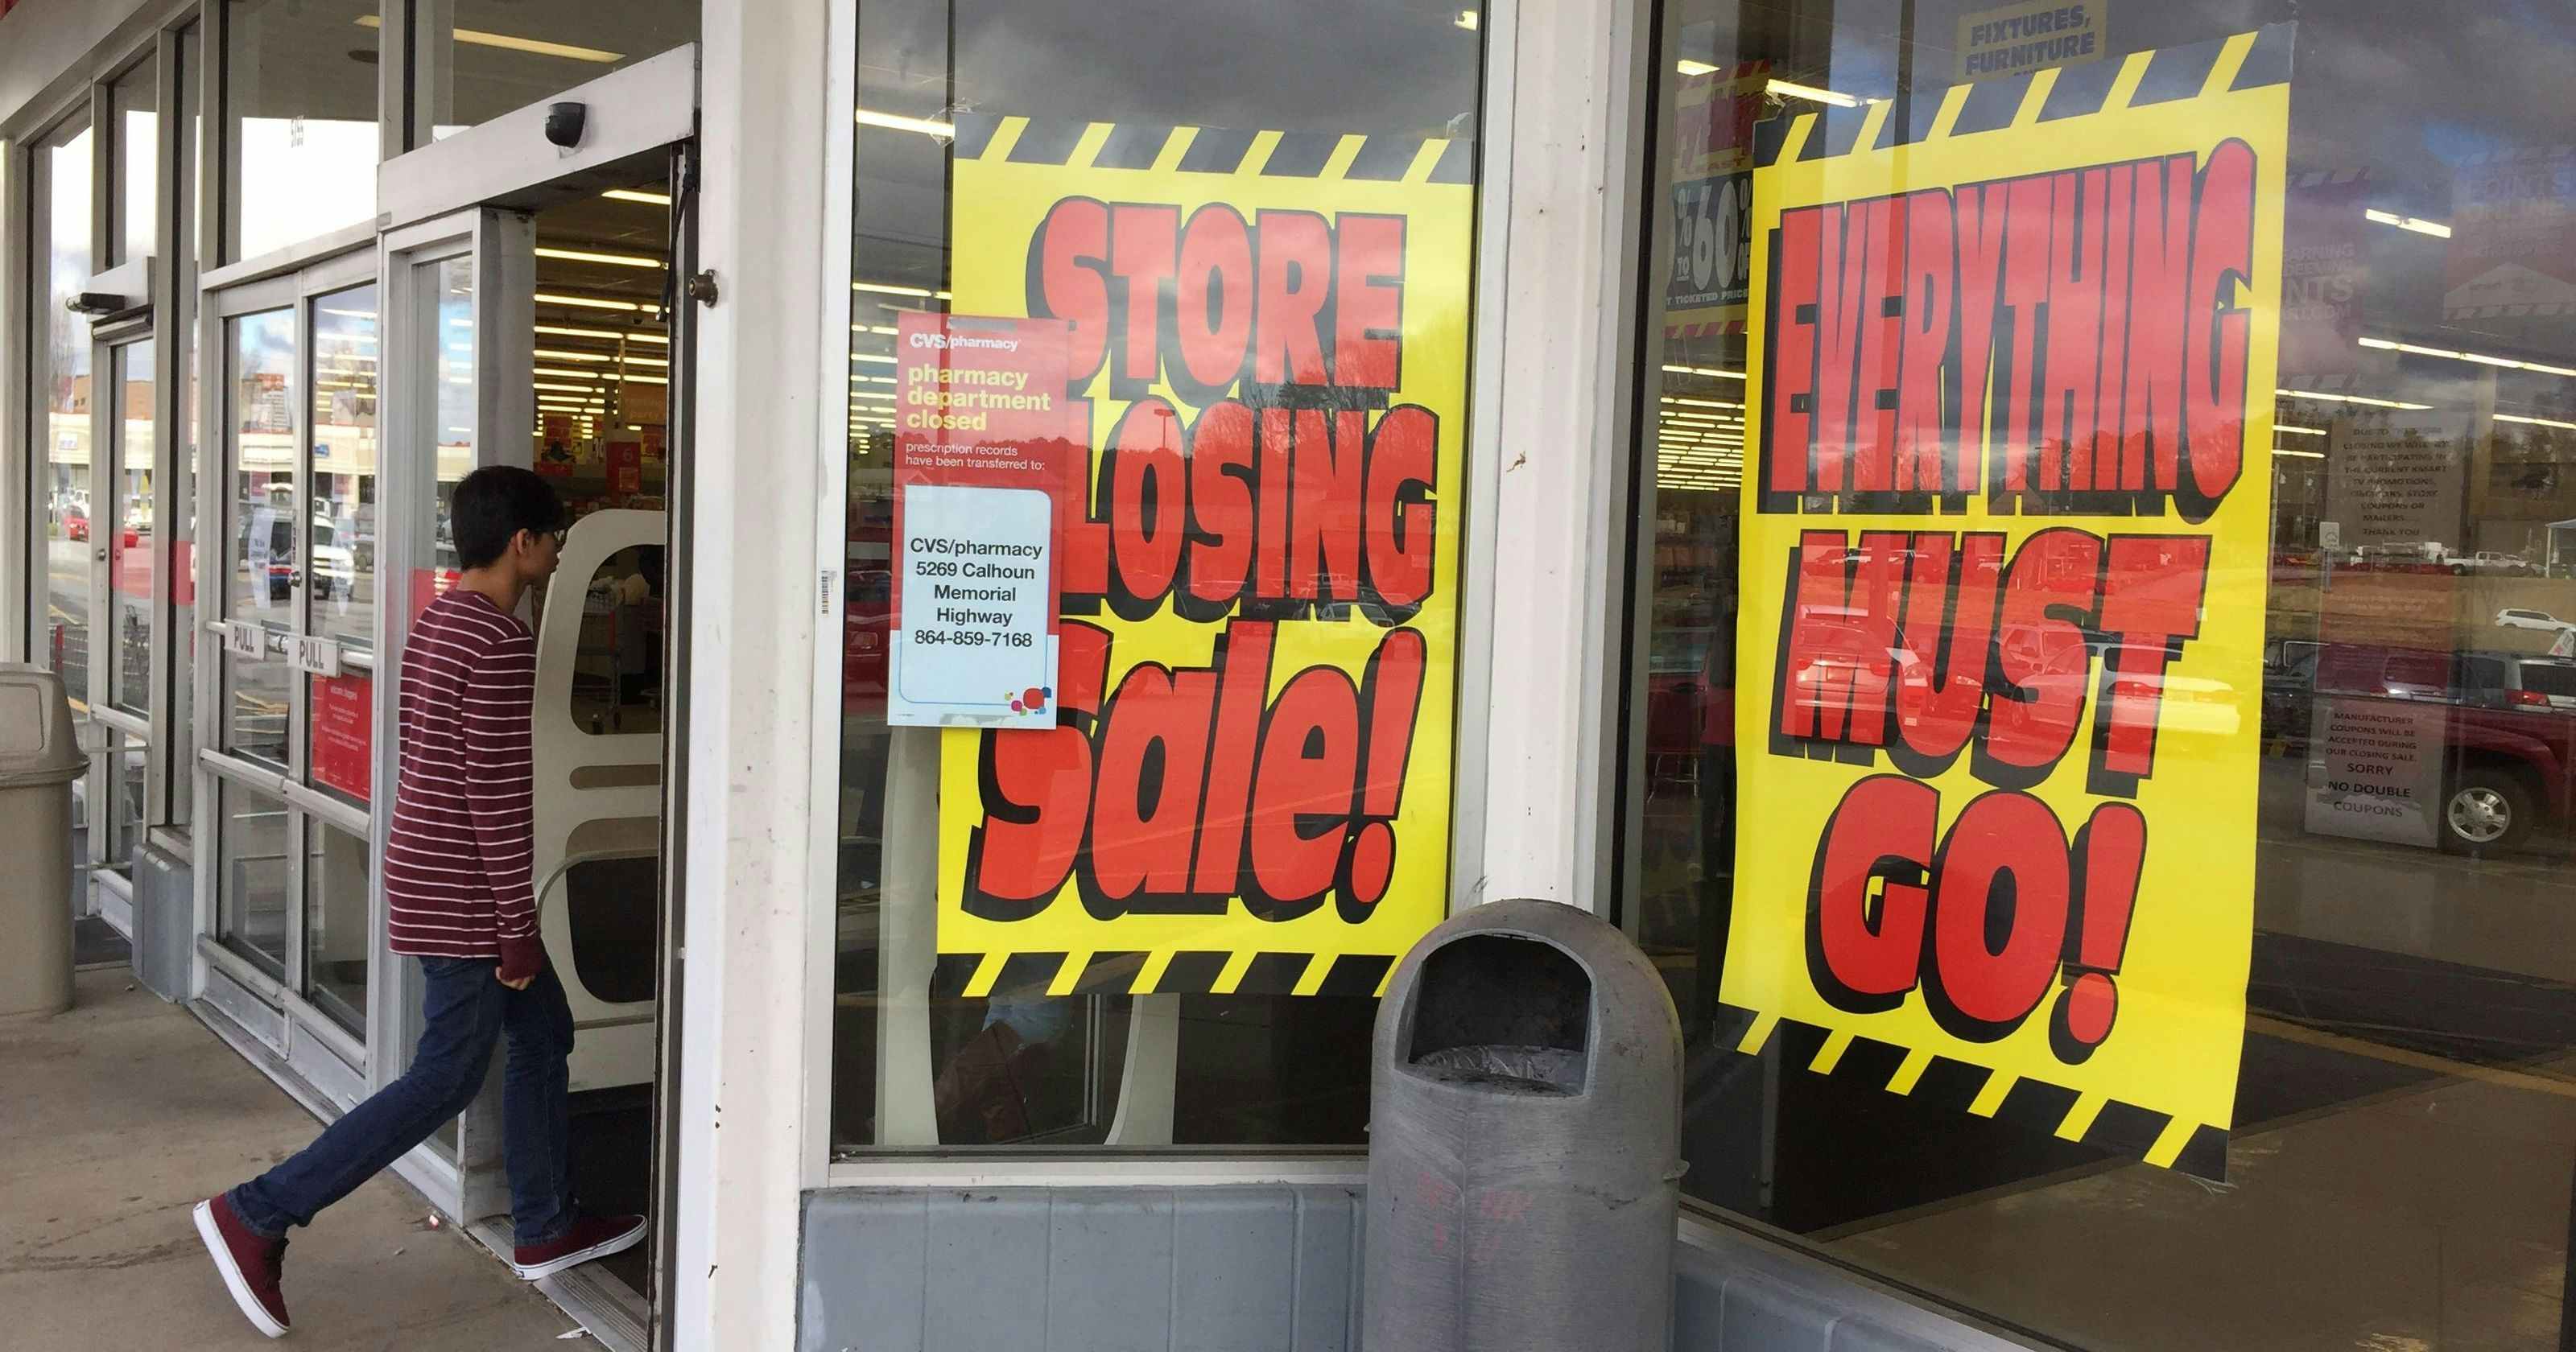 Store closing signs in a window of a store